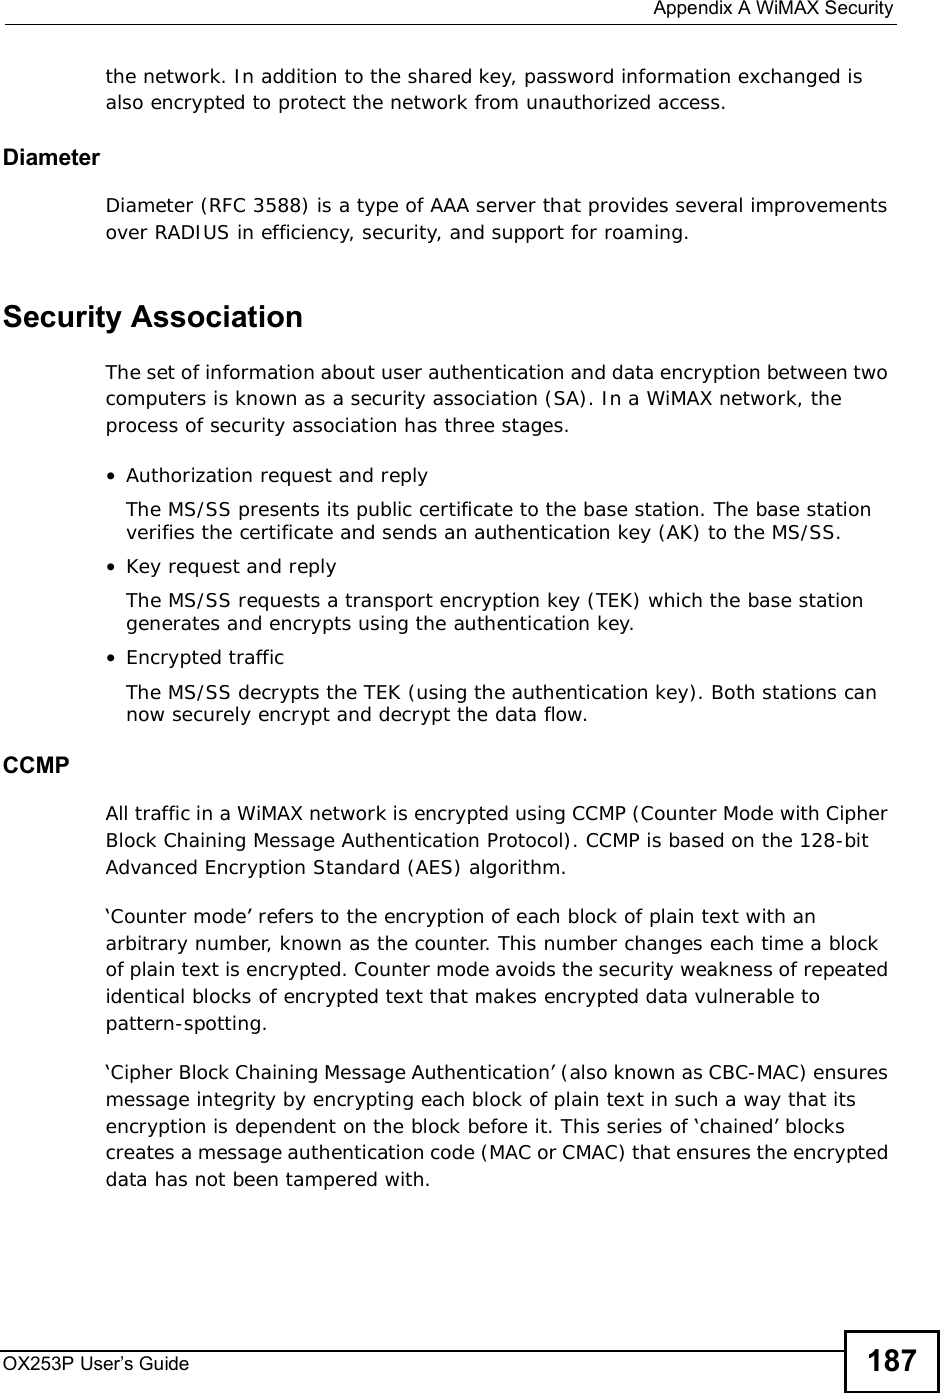  Appendix AWiMAX SecurityOX253P User’s Guide 187the network. In addition to the shared key, password information exchanged is also encrypted to protect the network from unauthorized access. DiameterDiameter (RFC 3588) is a type of AAA server that provides several improvements over RADIUS in efficiency, security, and support for roaming. Security AssociationThe set of information about user authentication and data encryption between two computers is known as a security association (SA). In a WiMAX network, the process of security association has three stages.•Authorization request and replyThe MS/SS presents its public certificate to the base station. The base station verifies the certificate and sends an authentication key (AK) to the MS/SS.•Key request and replyThe MS/SS requests a transport encryption key (TEK) which the base station generates and encrypts using the authentication key. •Encrypted trafficThe MS/SS decrypts the TEK (using the authentication key). Both stations can now securely encrypt and decrypt the data flow.CCMPAll traffic in a WiMAX network is encrypted using CCMP (Counter Mode with Cipher Block Chaining Message Authentication Protocol). CCMP is based on the 128-bit Advanced Encryption Standard (AES) algorithm. ‘Counter mode’ refers to the encryption of each block of plain text with an arbitrary number, known as the counter. This number changes each time a block of plain text is encrypted. Counter mode avoids the security weakness of repeated identical blocks of encrypted text that makes encrypted data vulnerable to pattern-spotting.‘Cipher Block Chaining Message Authentication’ (also known as CBC-MAC) ensures message integrity by encrypting each block of plain text in such a way that its encryption is dependent on the block before it. This series of ‘chained’ blocks creates a message authentication code (MAC or CMAC) that ensures the encrypted data has not been tampered with.